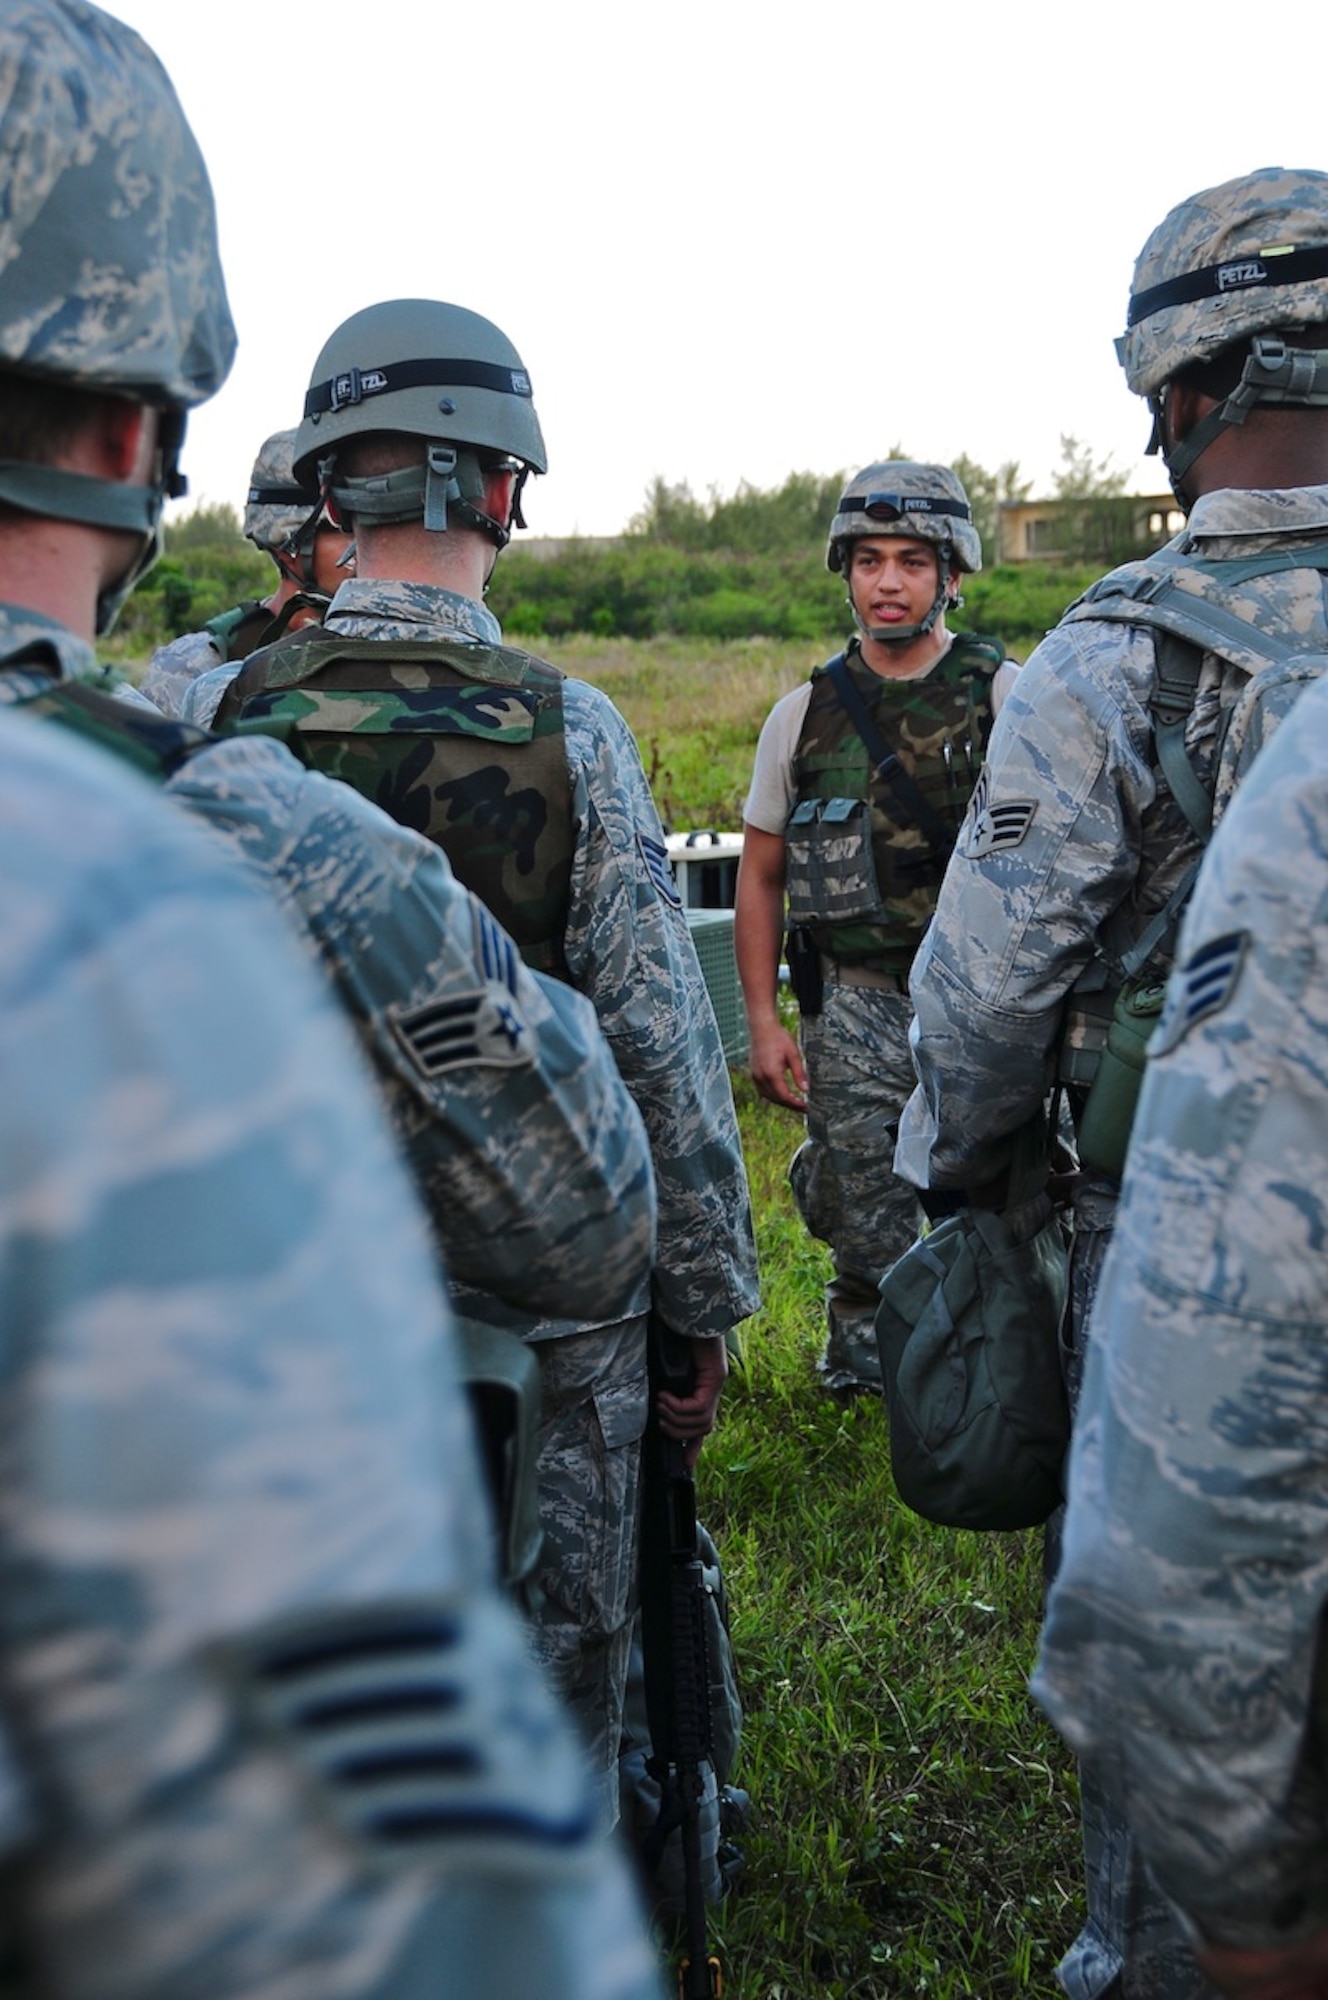 Capt. Mark Walkusky, 644th Combat Communications Squadron, brings Airmen up to speed upon their arrival at the simulated Forward Operating Base Dragon Hill. The 644 CBCS is conducting a deployment exercise from April 16 to 27 in order to test their capabilities out on the field and improve war-fighting capabilities. (U.S. Air Force photo by Airman 1st Class Marianique Santos)